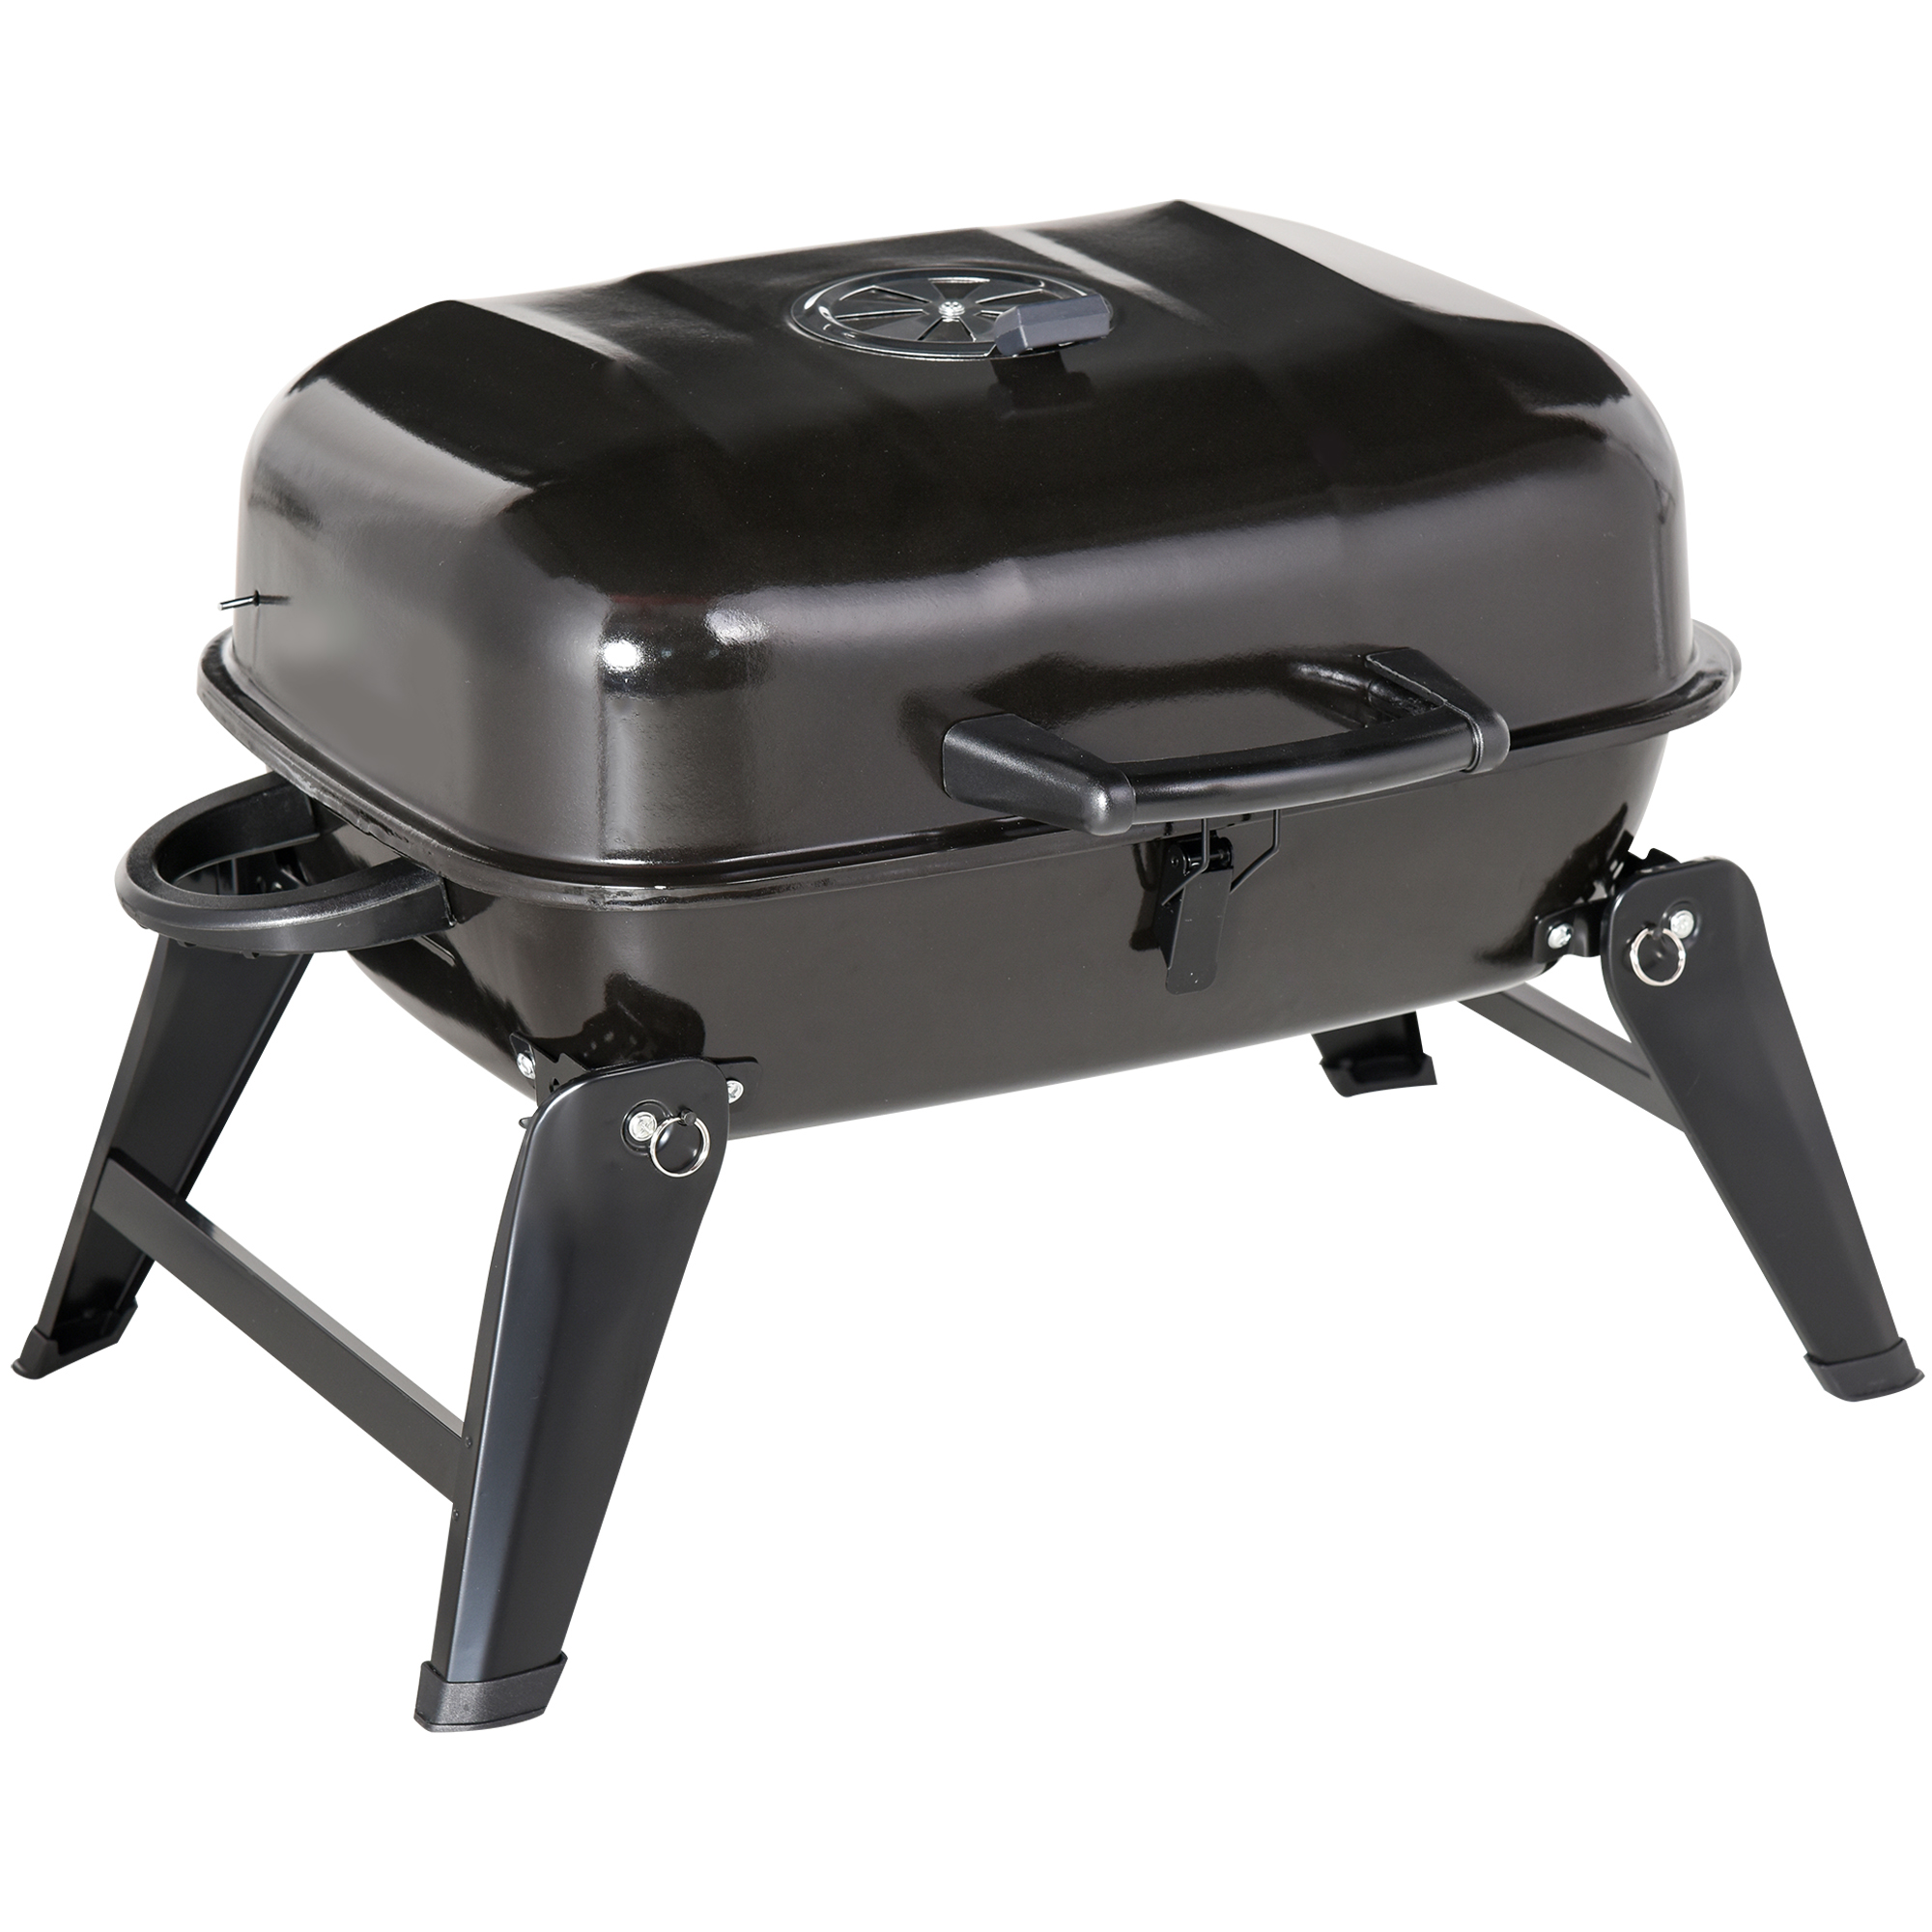 23" Portable Tabletop Charcoal Grill